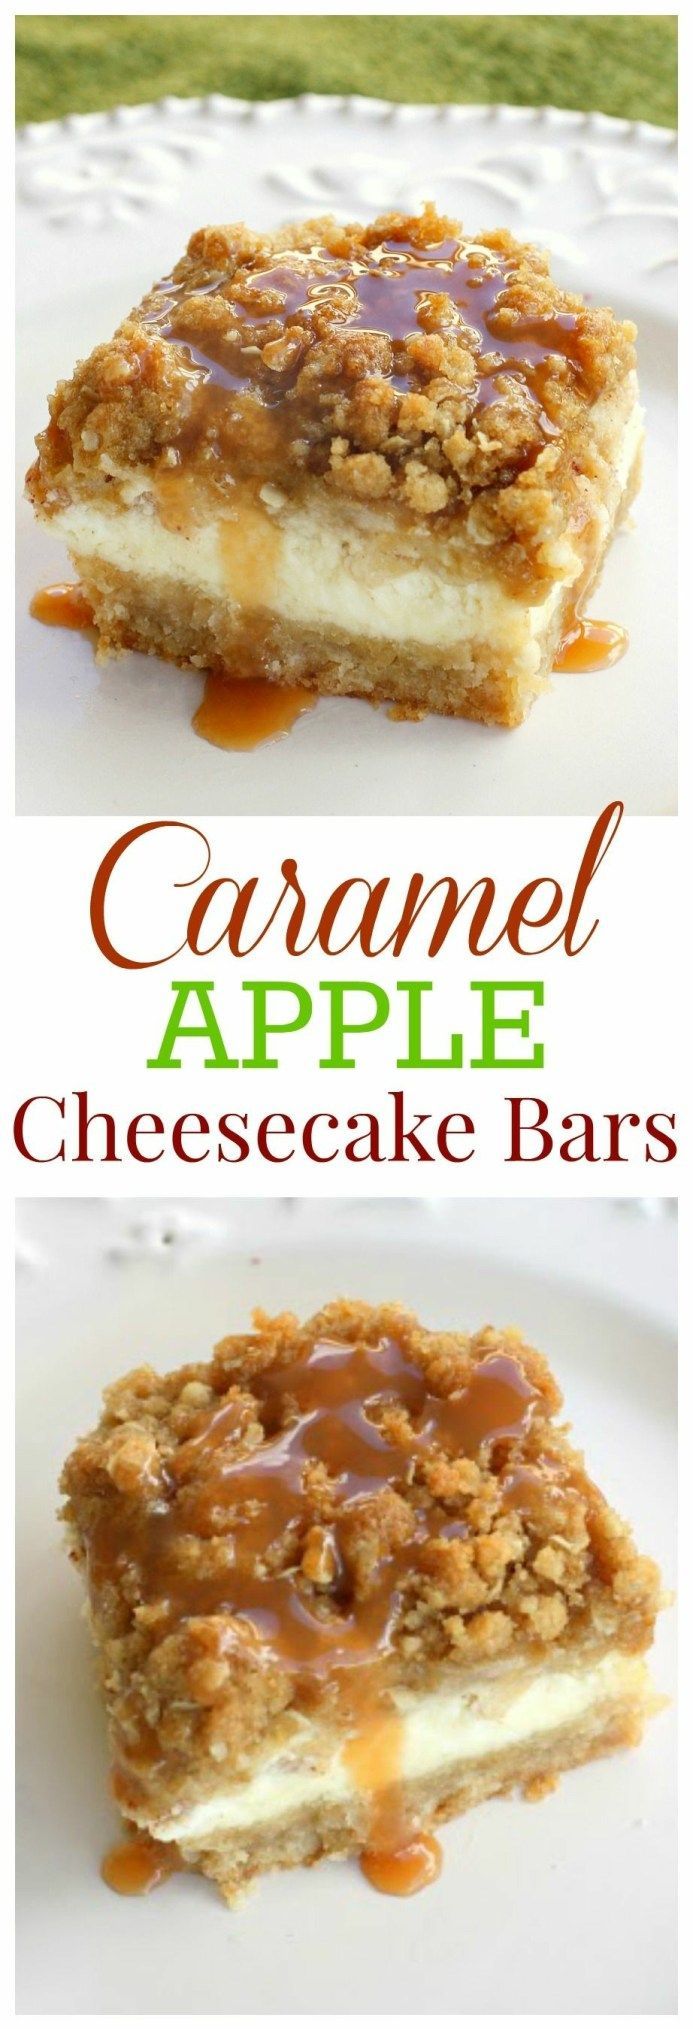 Caramel Apple Cheesecake Bars | The Girl Who Ate Everything -   18 thanksgiving desserts ideas